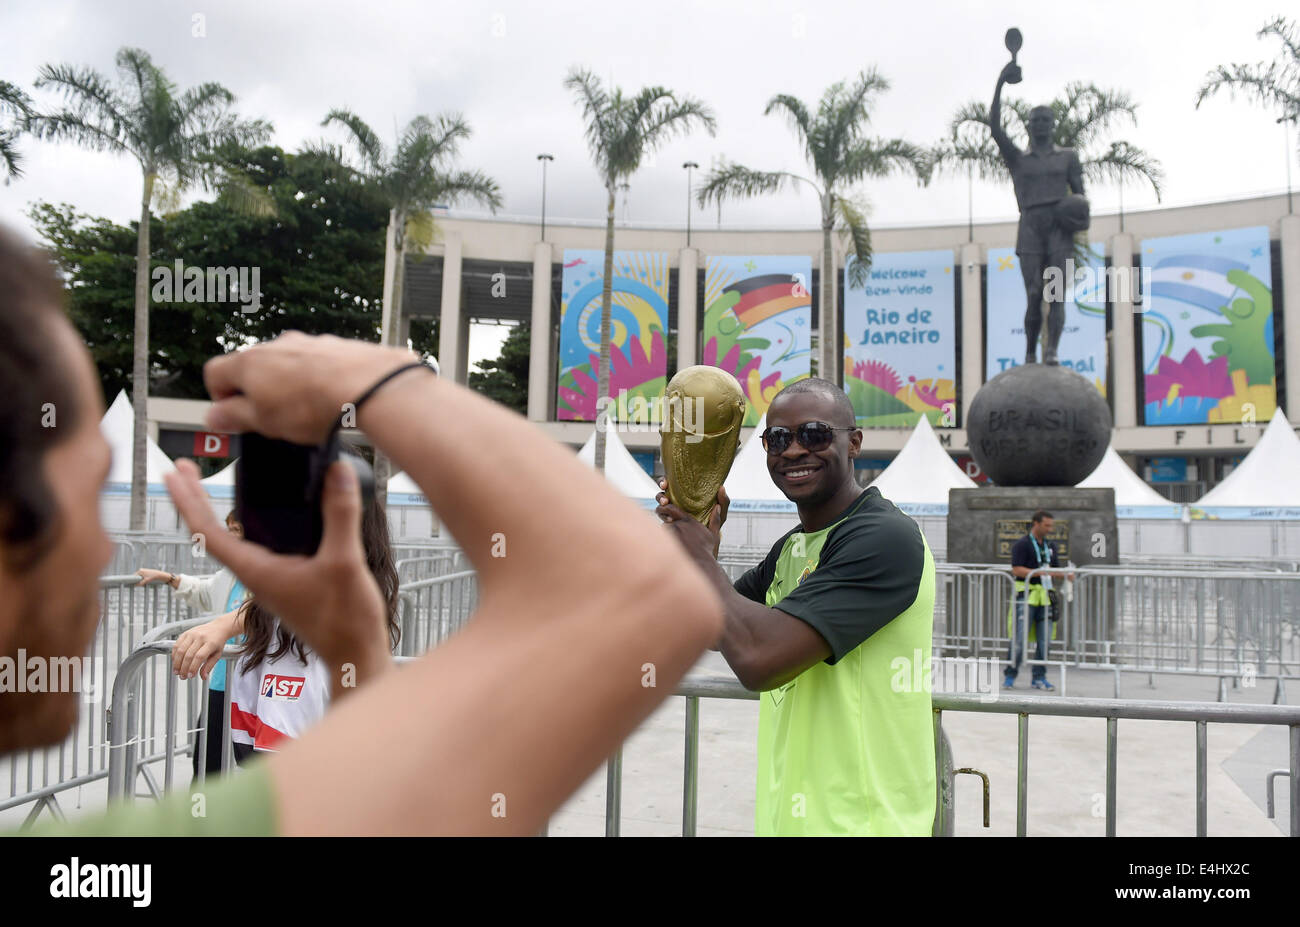 Rio de Janeiro, Brazil. 12th July, 2014. A soccer Fan poses with a copy of the World Cup trophy in front of the Estadio do Maracana in Rio de Janeiro, Brazil, 12 July 2014. Brazil will face The Netherlands on 12 July for the third place in the FIFA World Cup Brazil 2014 match at National Stadium in Brasilia. Photo: Thomas Eisenhuth/dpa/Alamy Live News Stock Photo